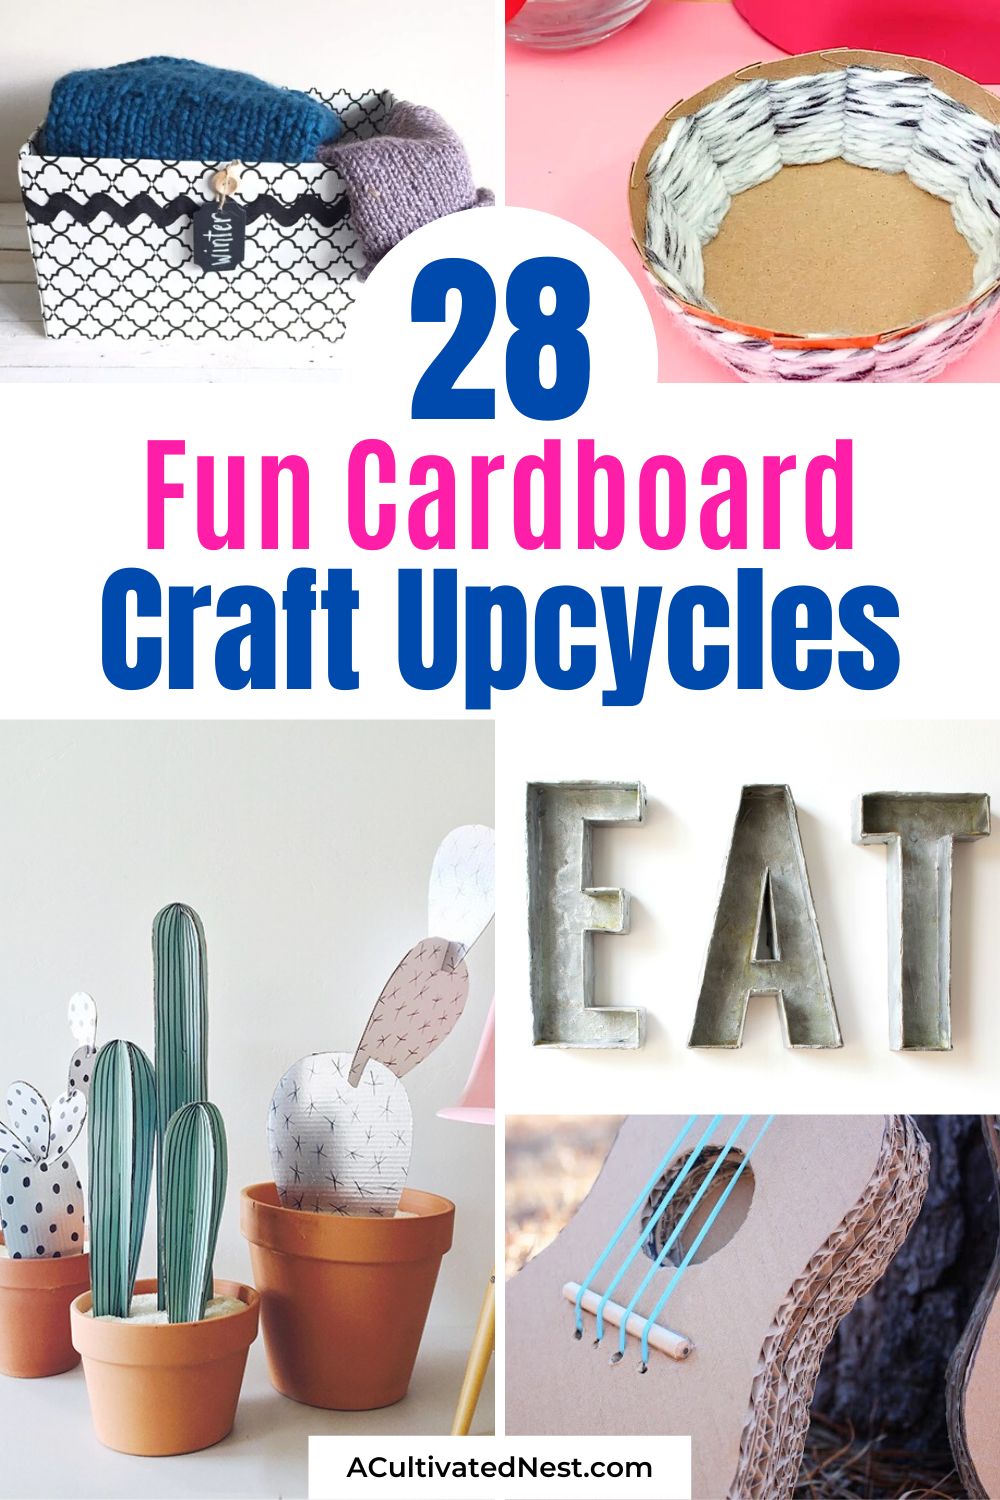 28 Clever Cardboard Craft Ideas- A fun way to recycle your cardboard delivery boxes is with these clever cardboard craft upcycle ideas! There are so many cute cardboard box upcycles you can do! | things to make with cardboard boxes, #recycling #upcycling #craftIdeas #DIY #ACultivatedNest